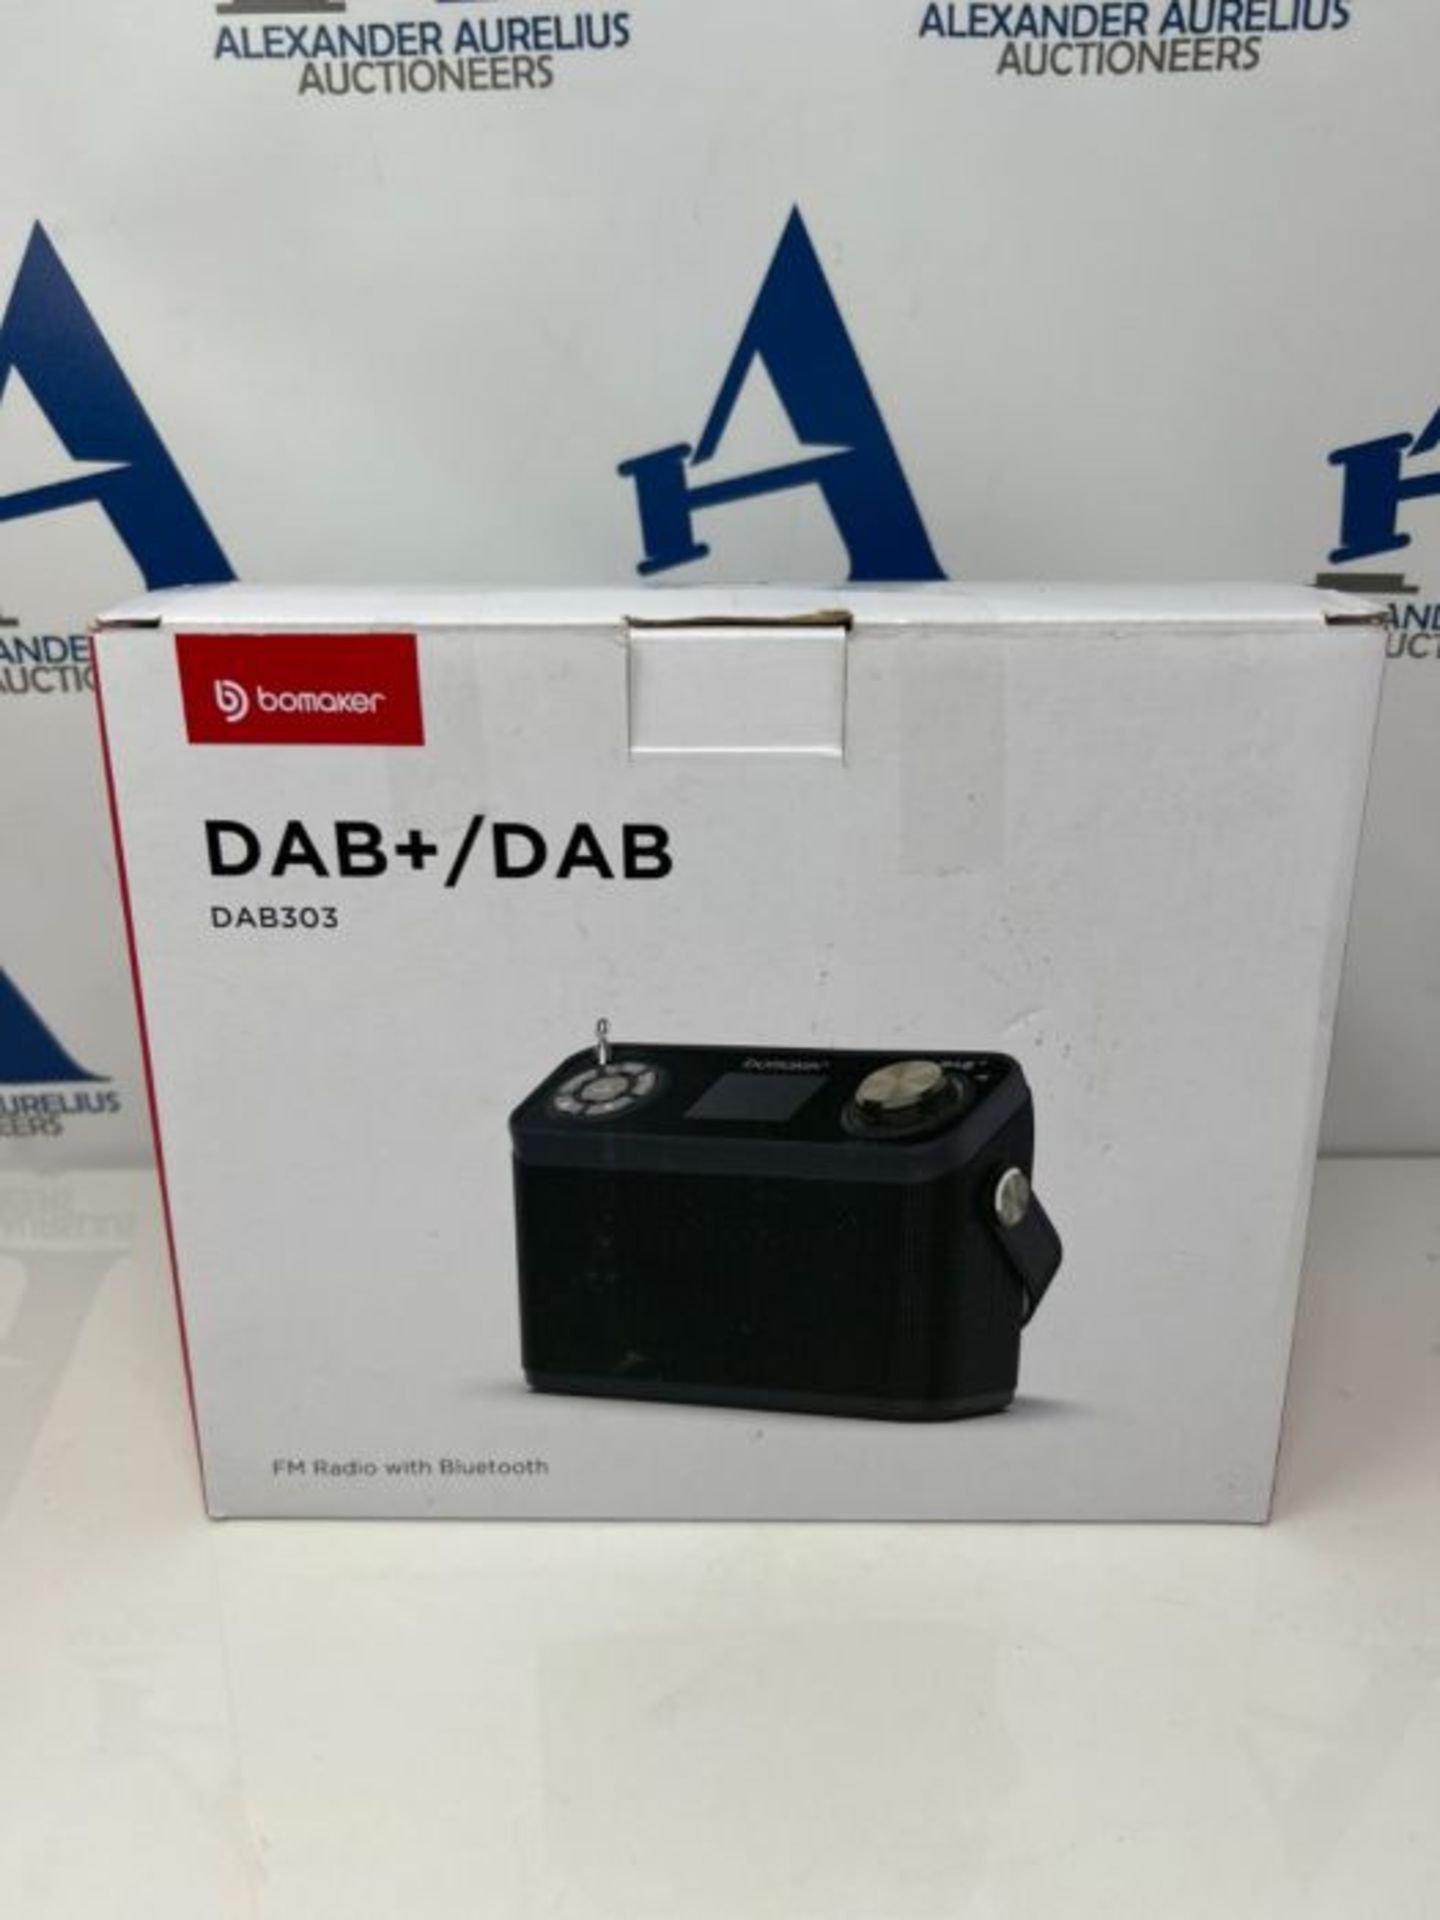 RRP £50.00 Portable Digital Dab Radio - Radio Dab+ & FM Colour LCD Rechargeable Bluetooth Battery - Image 2 of 3